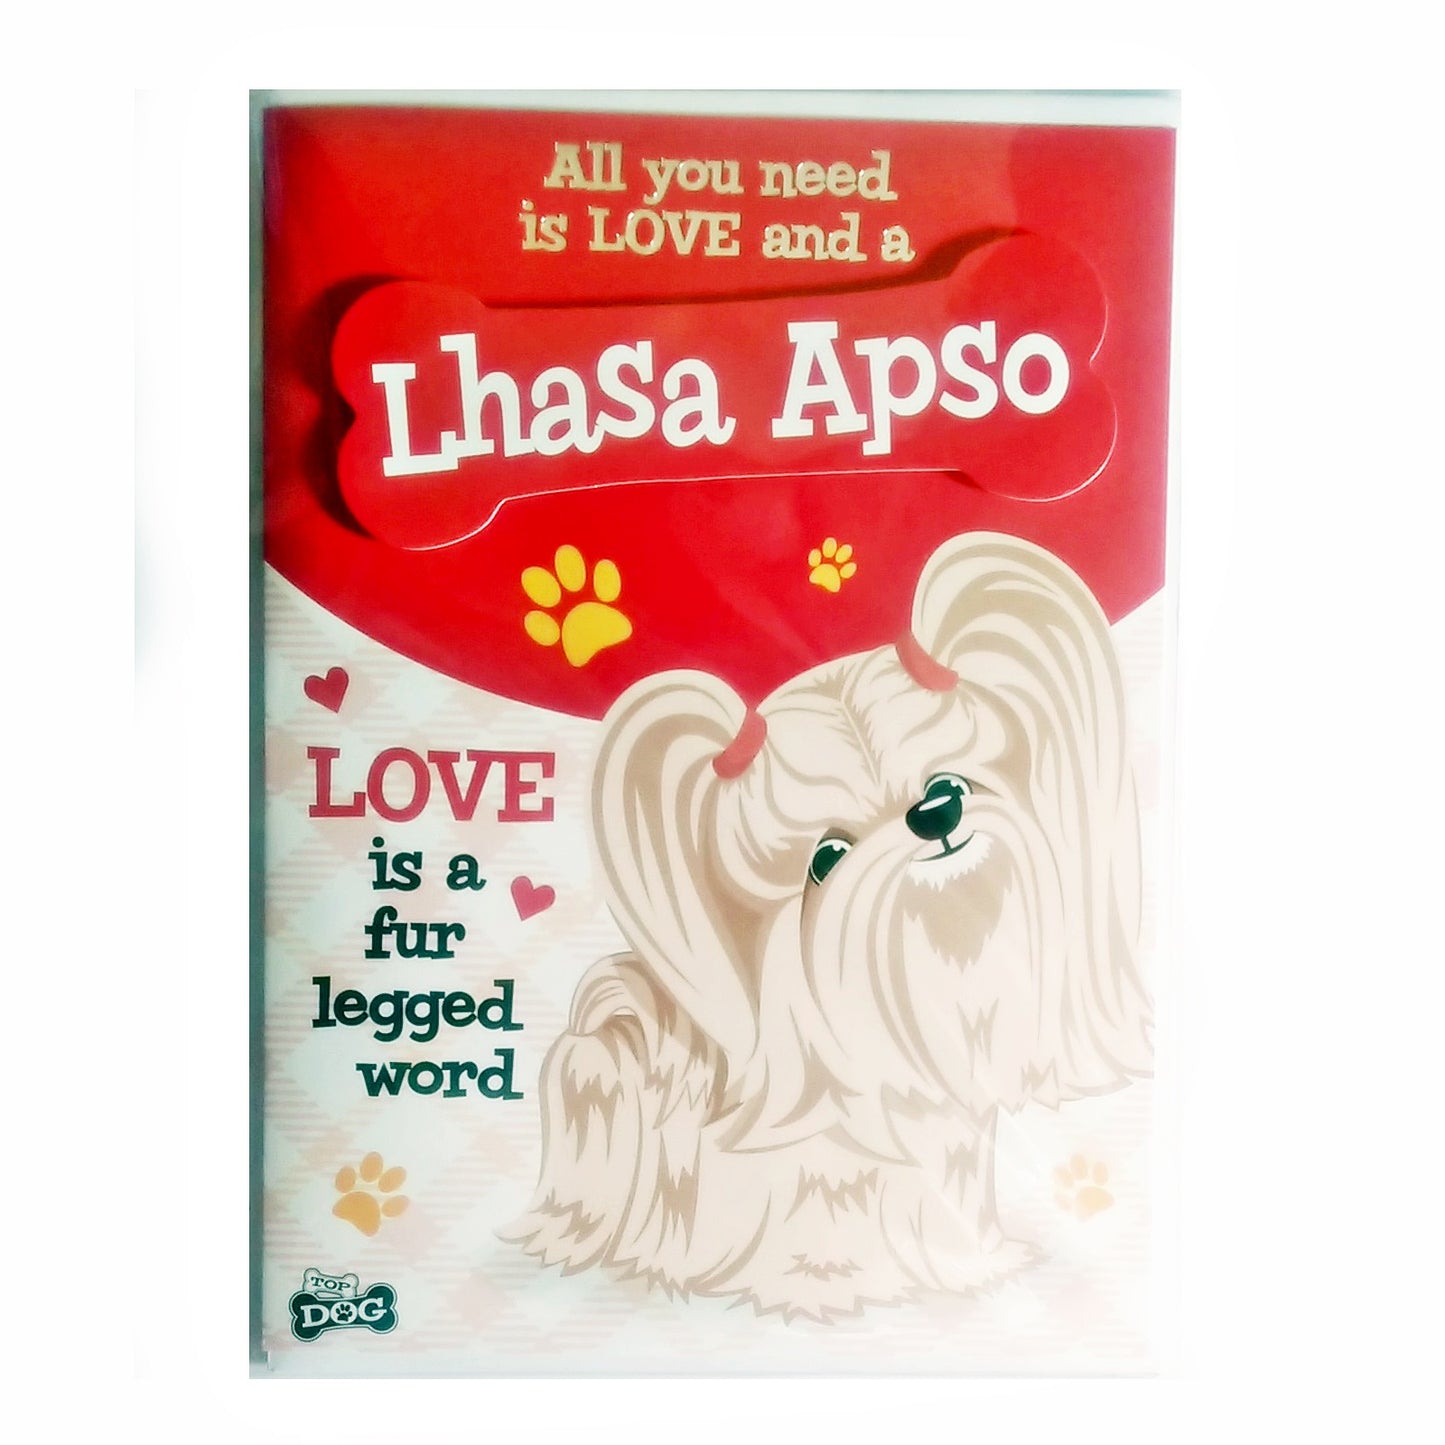 Wags & Whiskers Dog Greeting Card "Lhasa Apso" by Paper Island